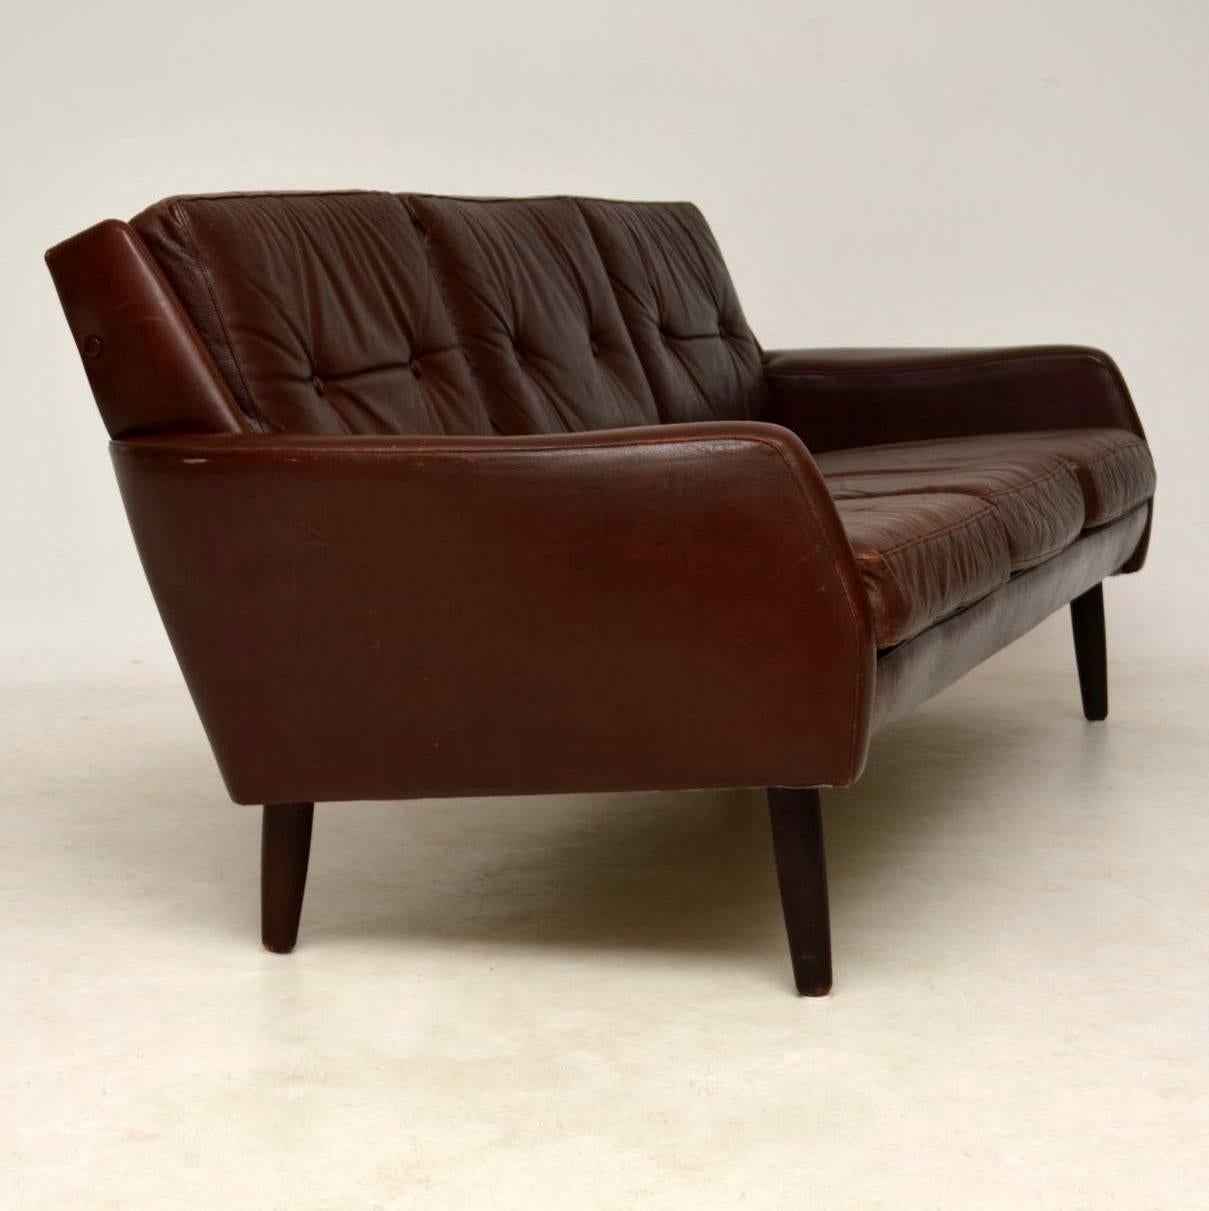 A stunning and very well made vintage Danish leather sofa, this dates from around the 1960-1970s. It’s in great original condition and is very comfortable. There is some minor surface wear to the leather here and there, there are no rips or